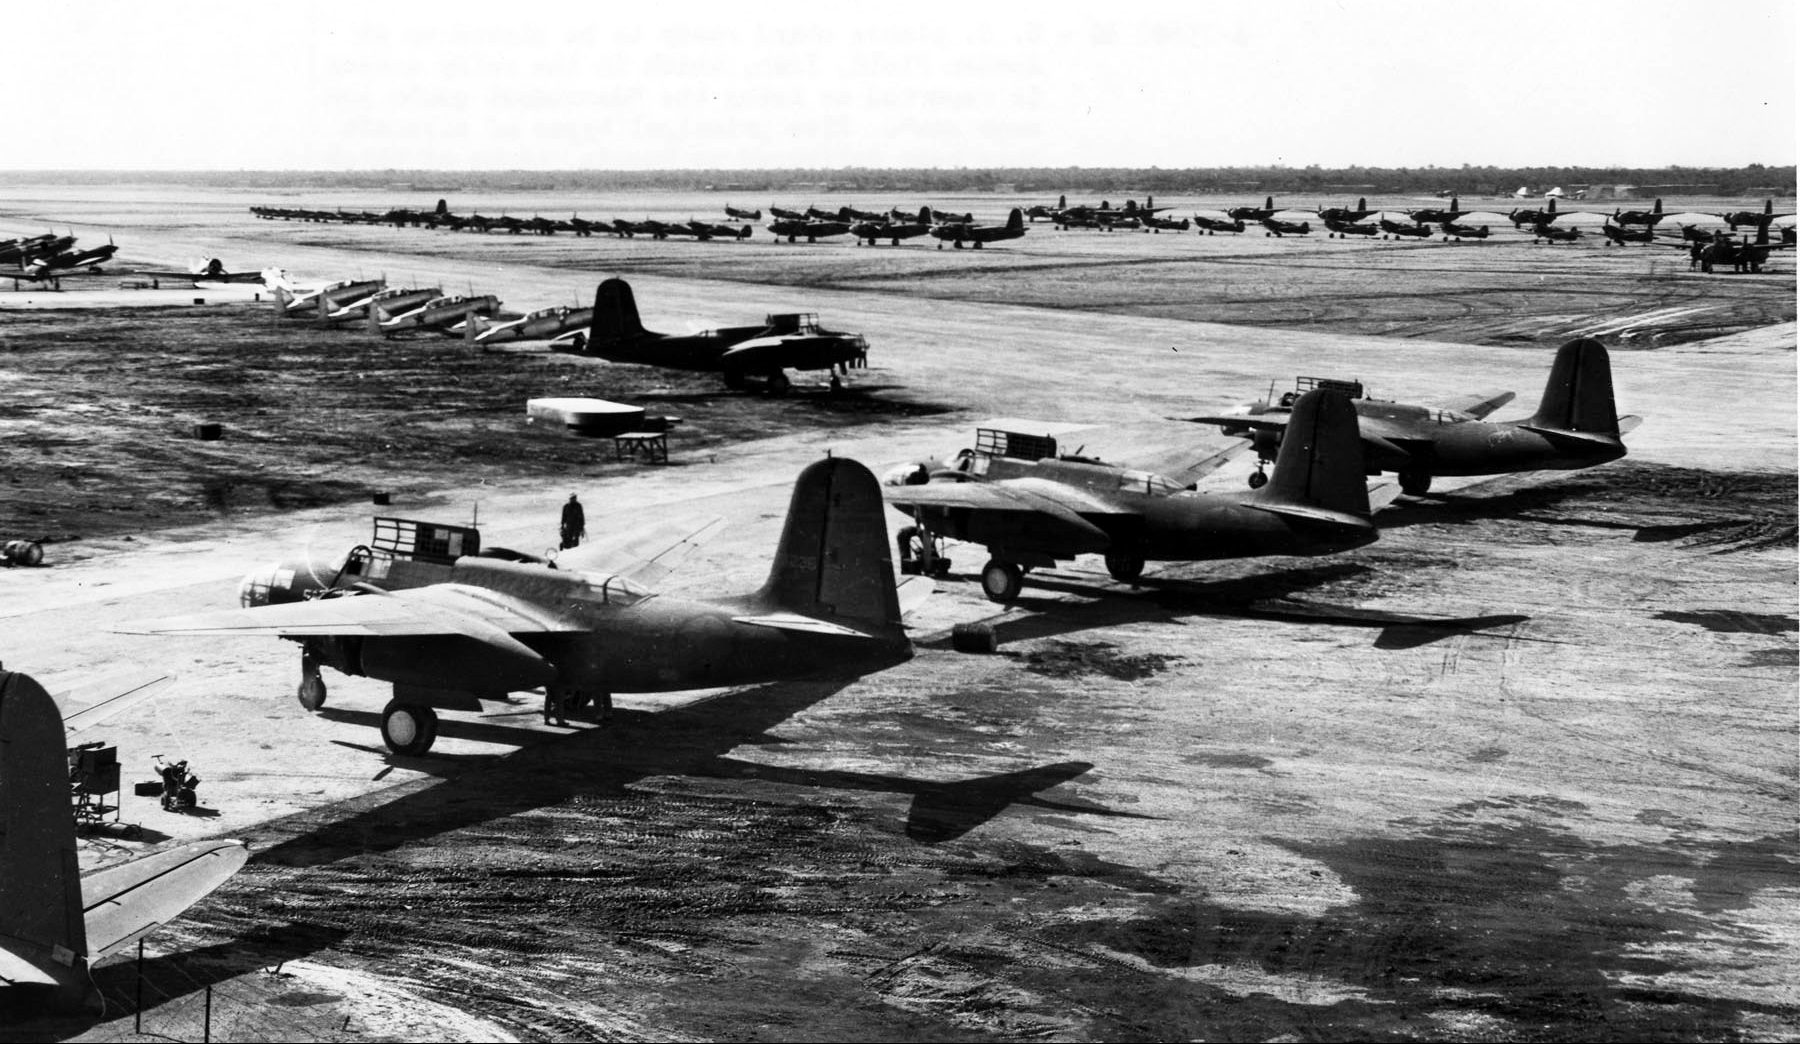 Aircraft manufactured in the U.S. await their new owners, the Soviet Red Air Force, at an airfield in Iran. The U.S. supplied several types of aircraft to the Soviet Union through Lend-Lease, including the A-20, P-39, P-40, B-25, and AT-6.